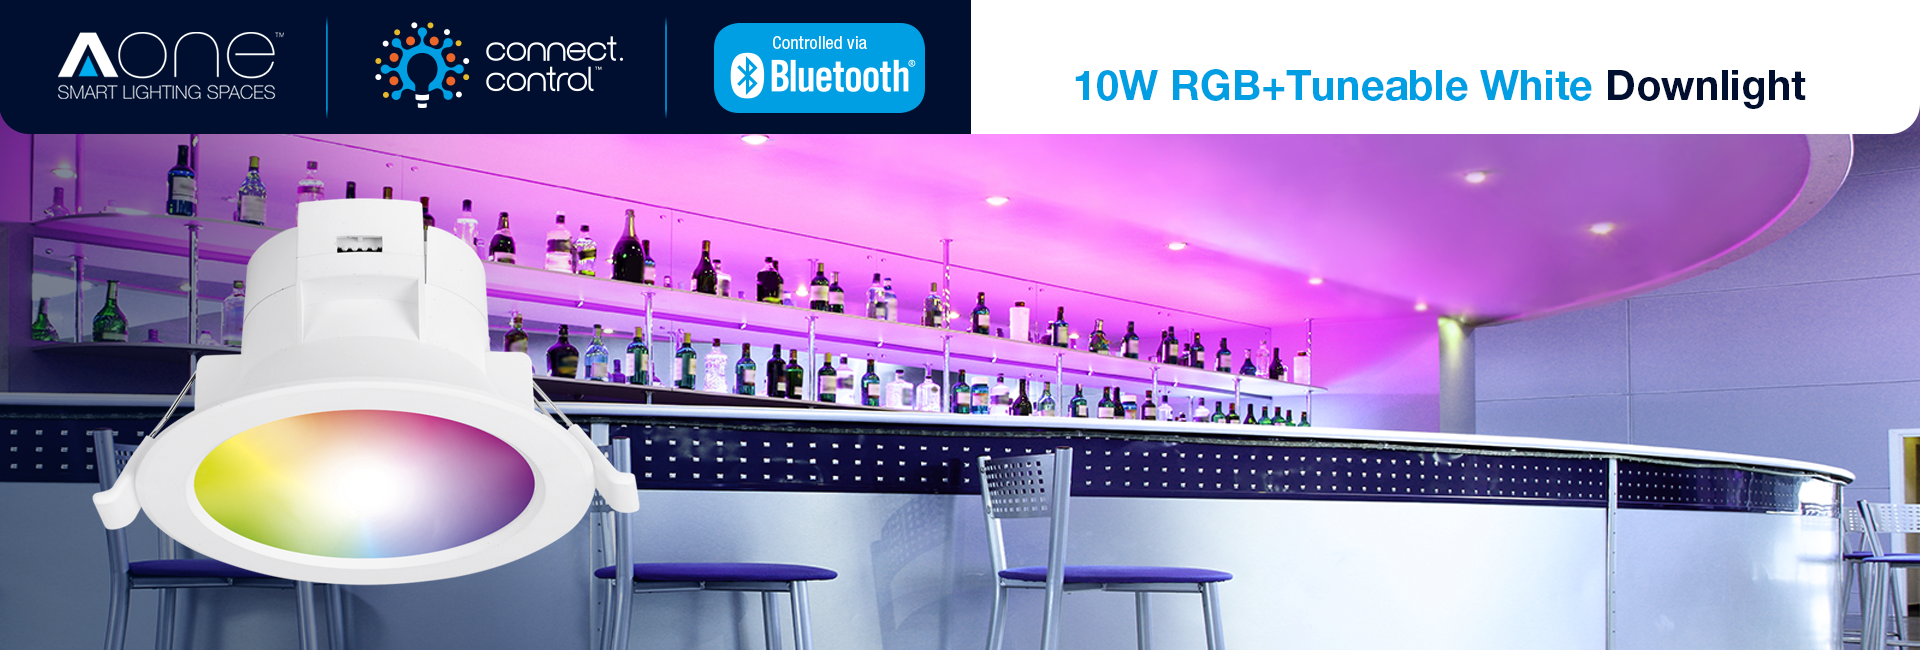 Show products in category Make Bars & Nightclubs Sexy with Smart Lighting- it’s Simpler than Ever